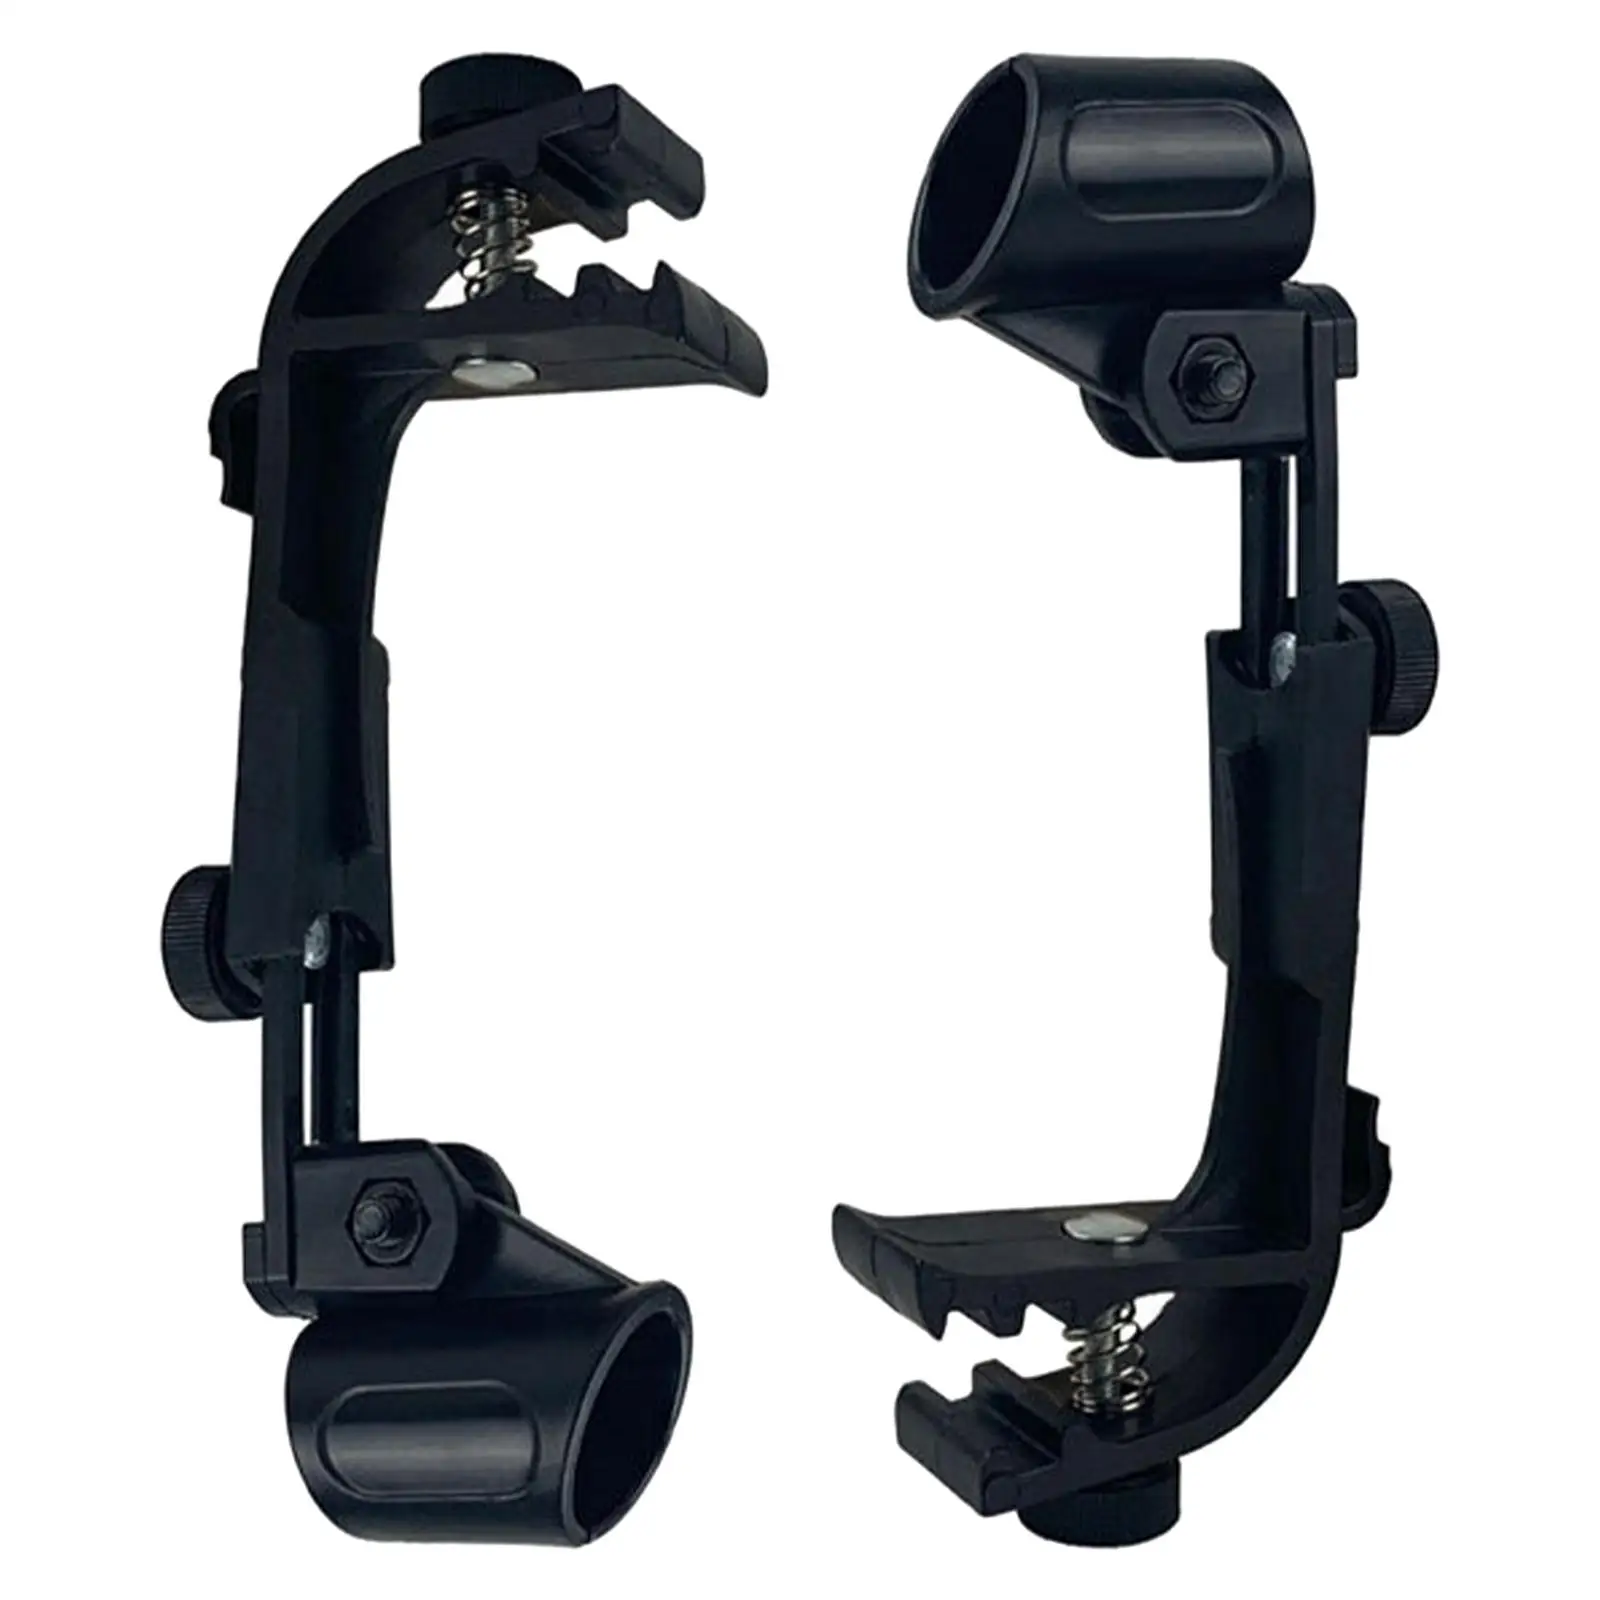 Drum Microphone Clamp Holder Adjustable Accessories Sturdy Drum Rim Clamp Plastic for Mount Microphone Meeting Recording Lecture